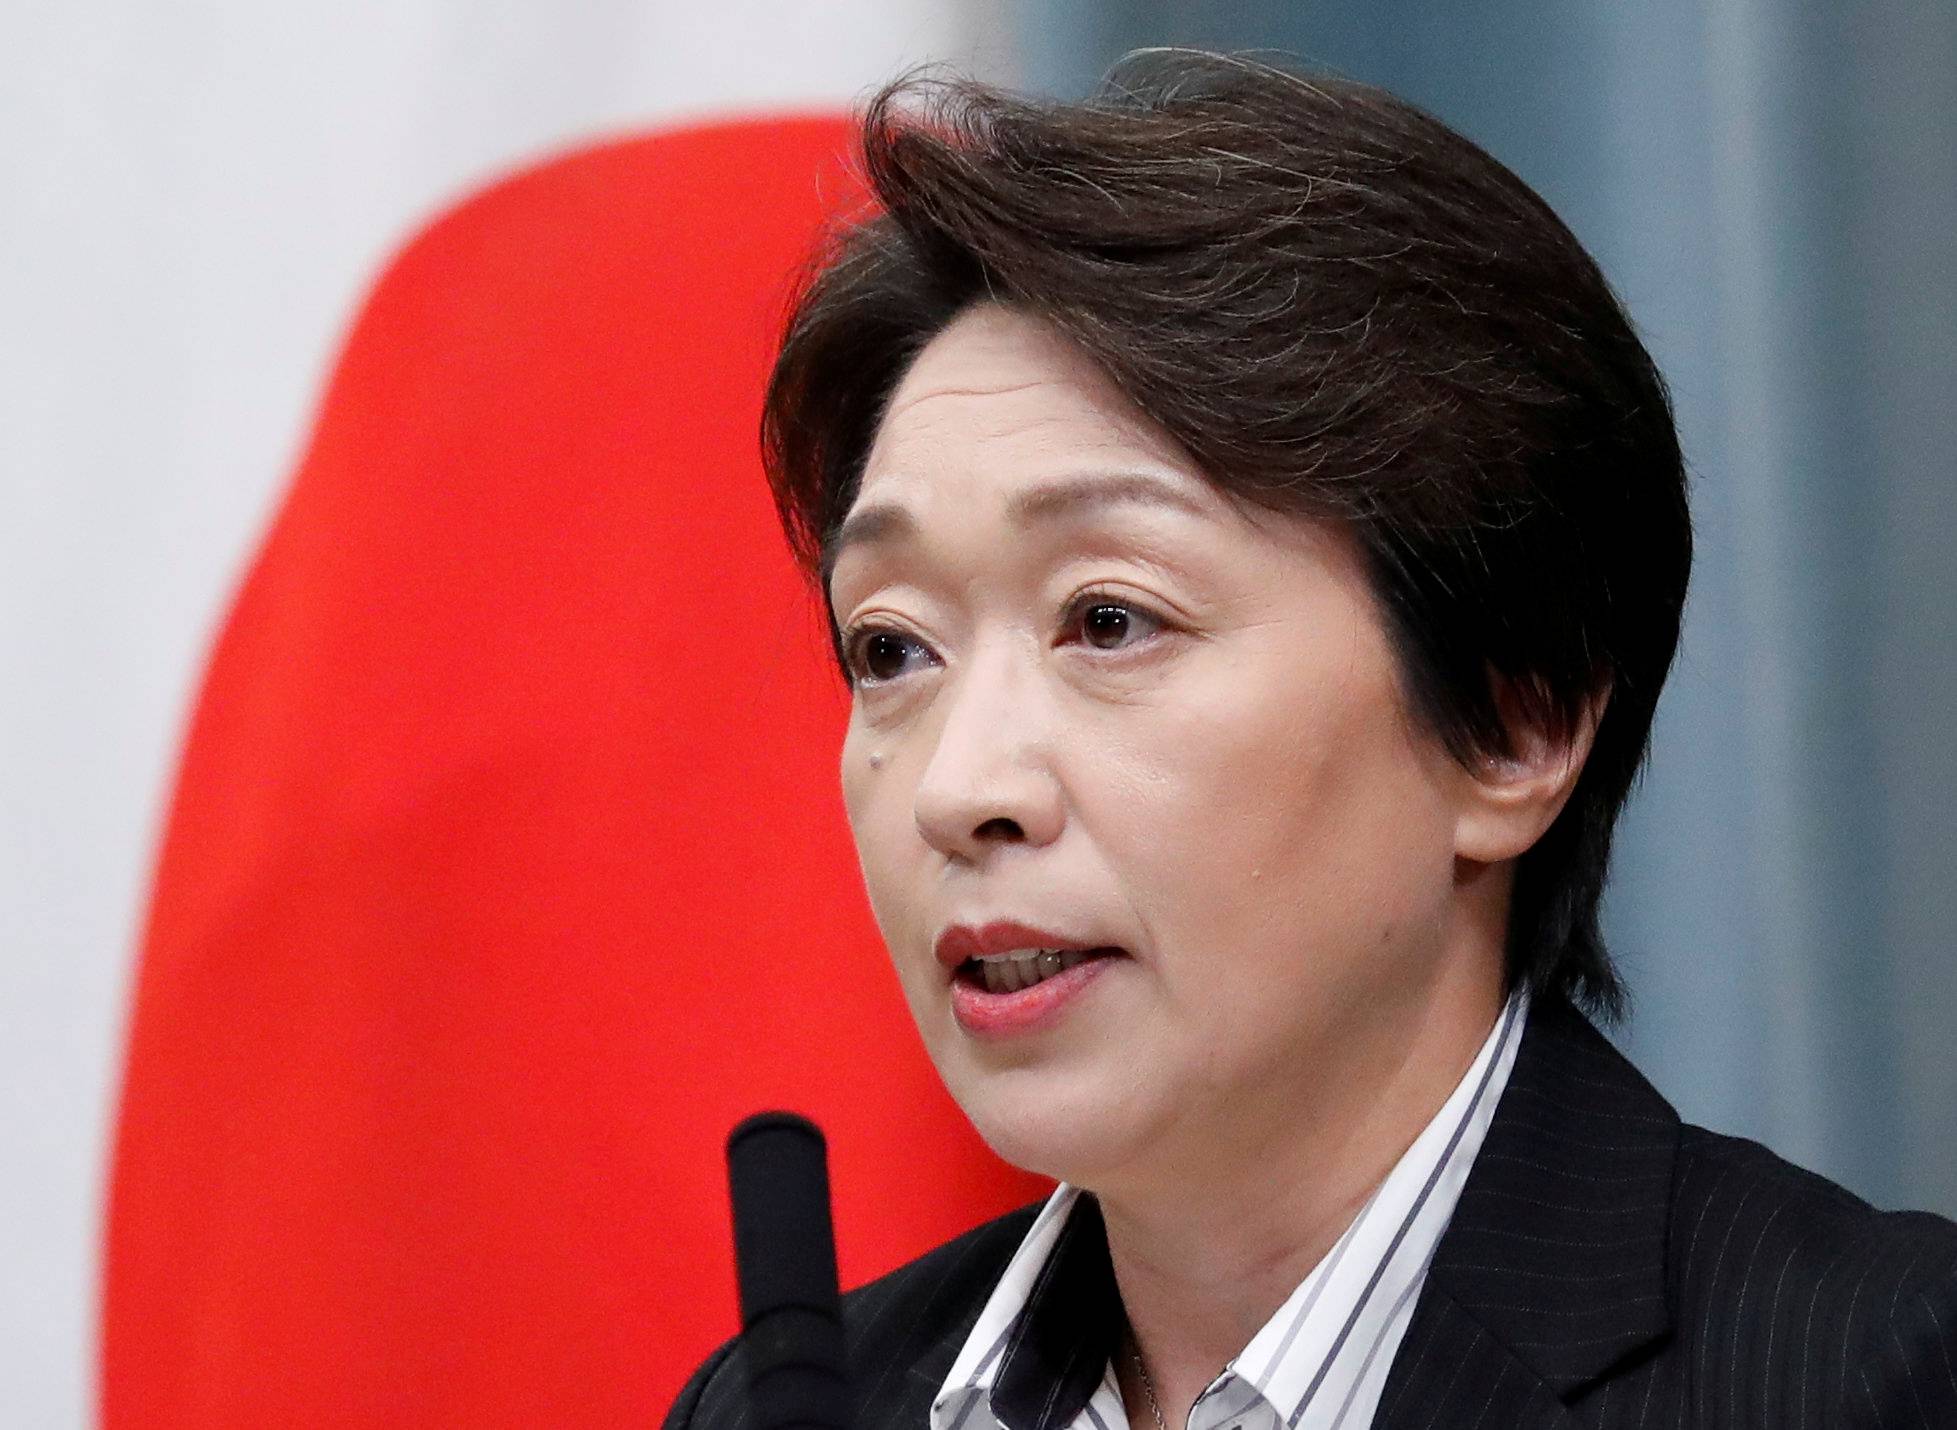 Olympic Minister Seiko Hashimoto attends a news conference at Prime Minister Shinzo Abe's official residence on Sept. 11, 2019. | REUTERS